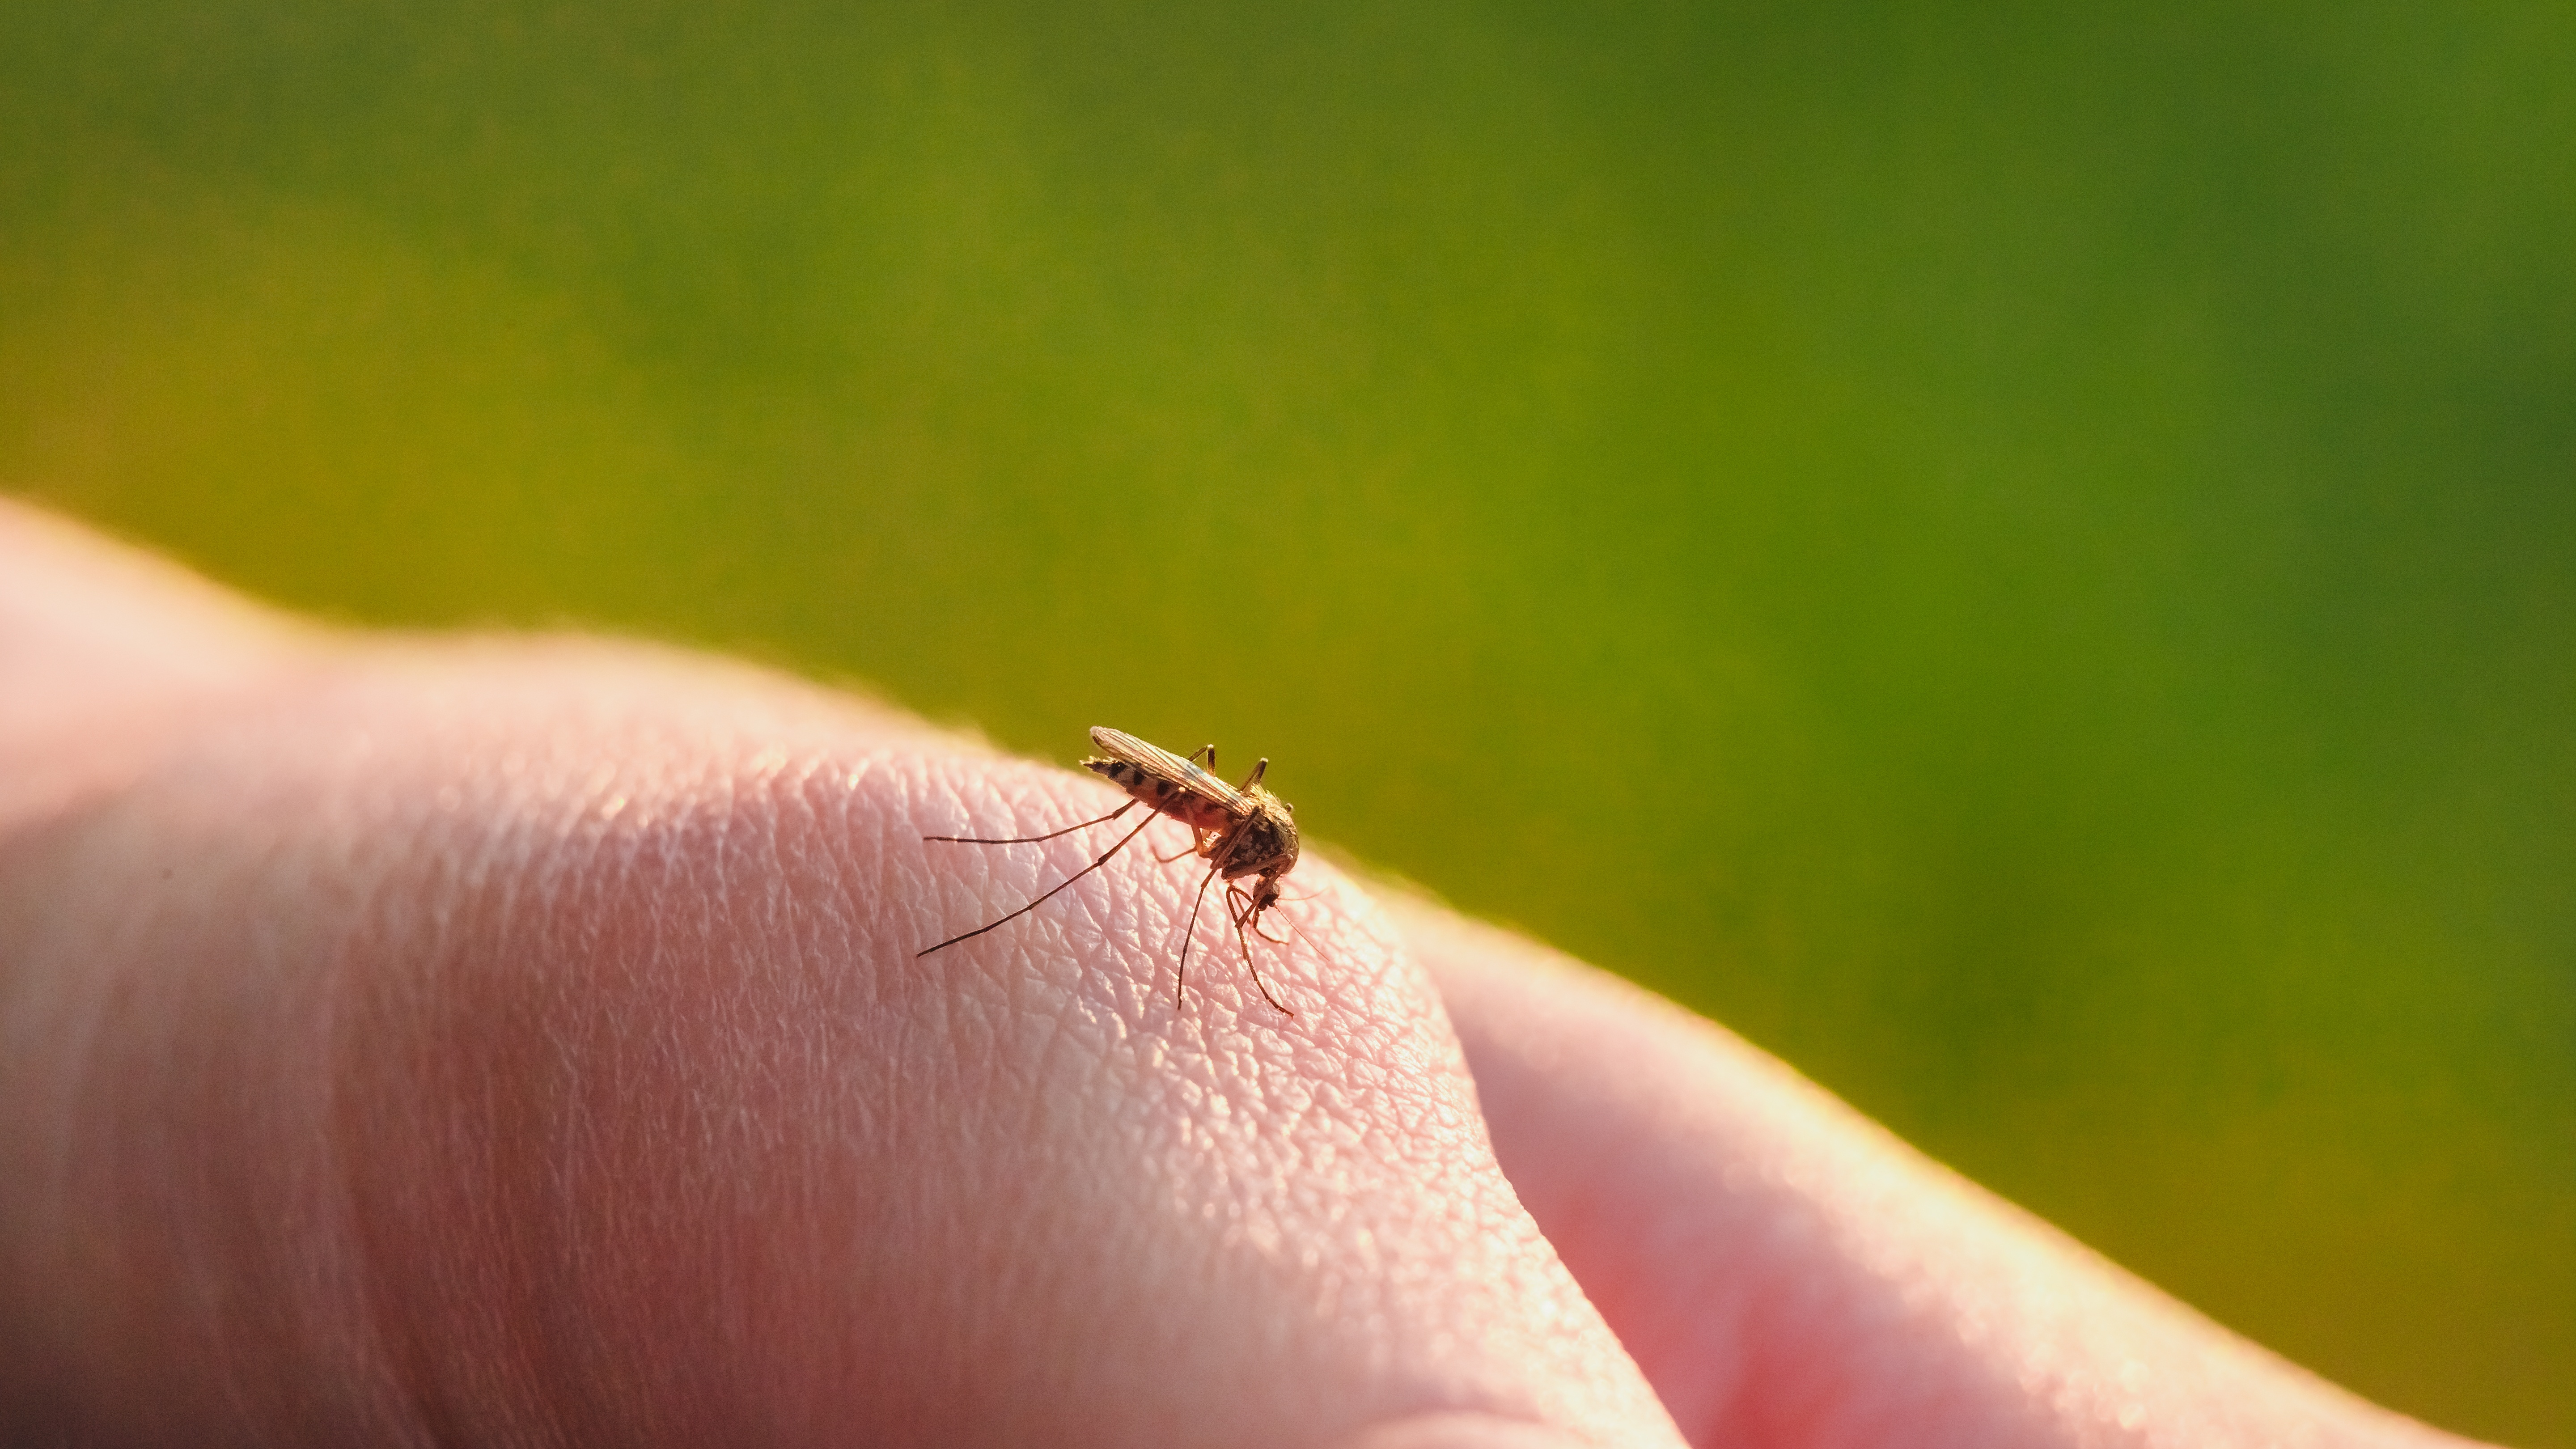 Mosquitoes are cold-blooded insects, which means that their body temperature is usually the same as their environment.